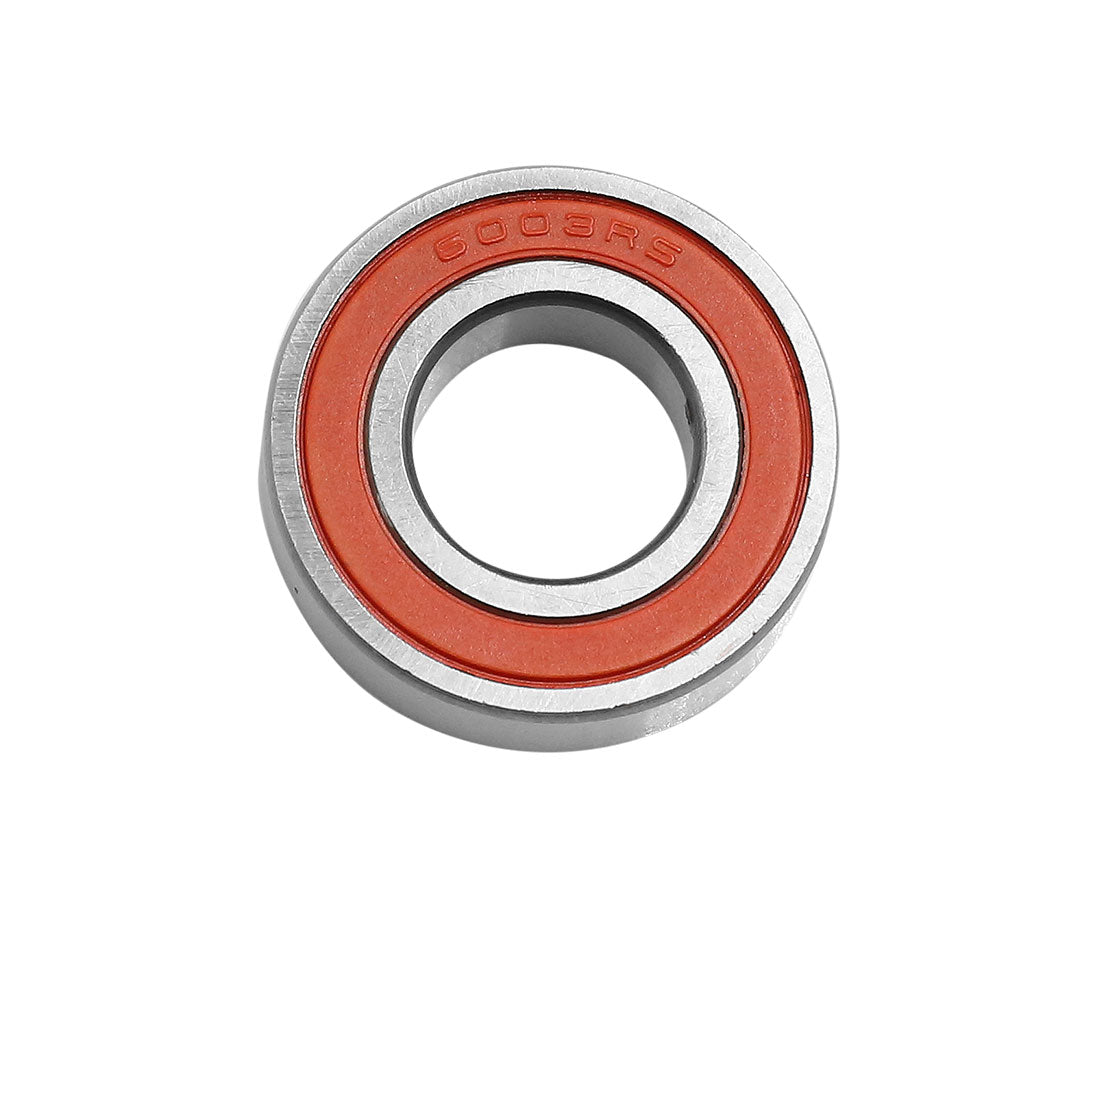 uxcell Uxcell 10pcs Universal 6204RS Deep Groove Sealed Shielded Ball Bearing 47 x 20 x 14mm